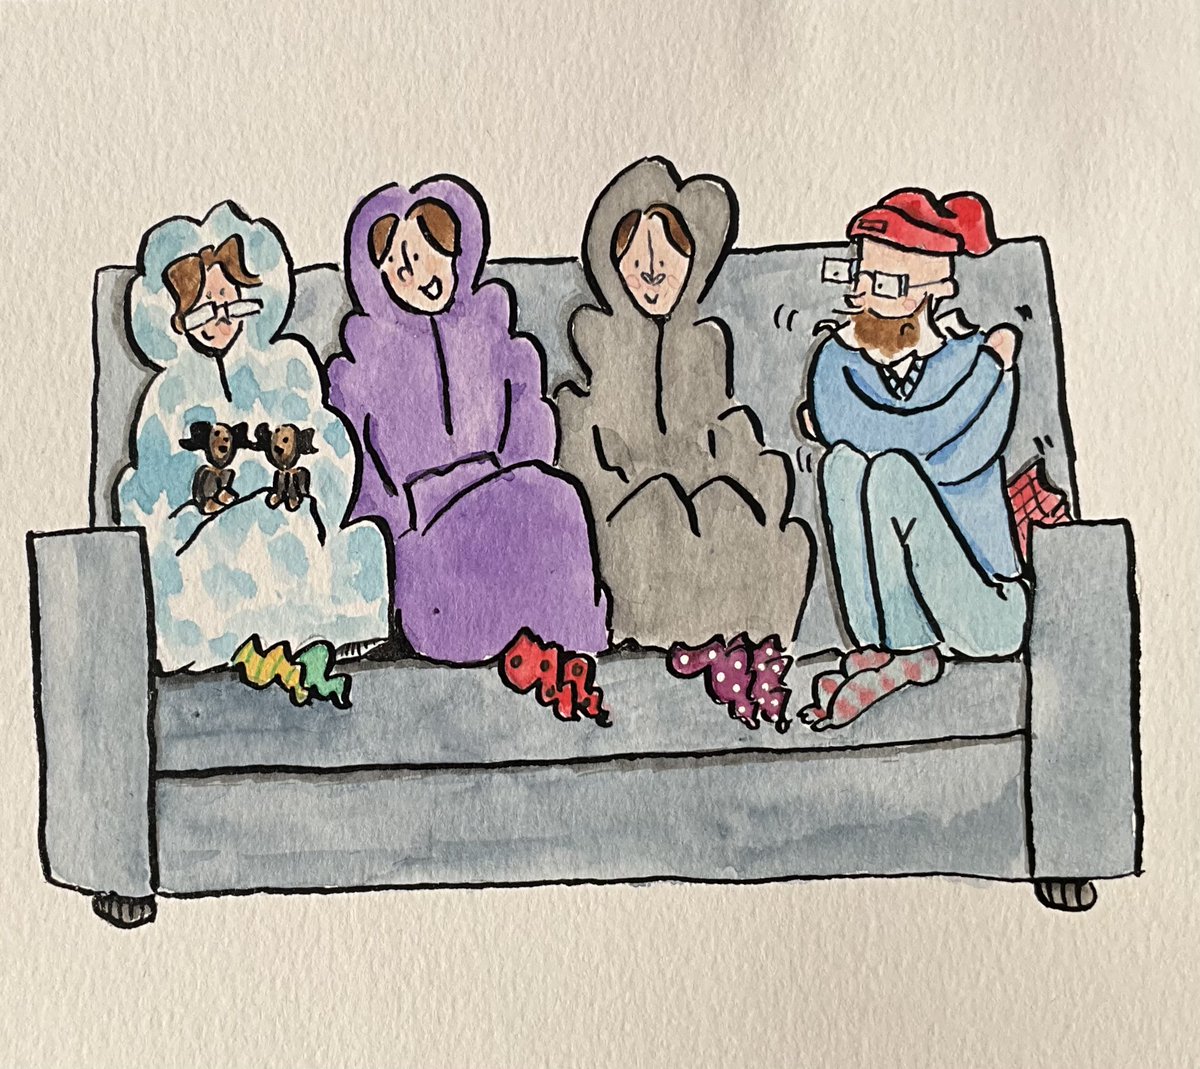 A snoodie for everyone but me… brrrr chatter chatter. #doodlediary #doodle #snoodie #oodies #watercolor #watercolour #oodie #kidlit #myfamily #ink #sketch #familylove #familylife #dadlife #illustration #comicdiary #warm #cold #kidlitart #kidlitillustration #fatherhood #childhood